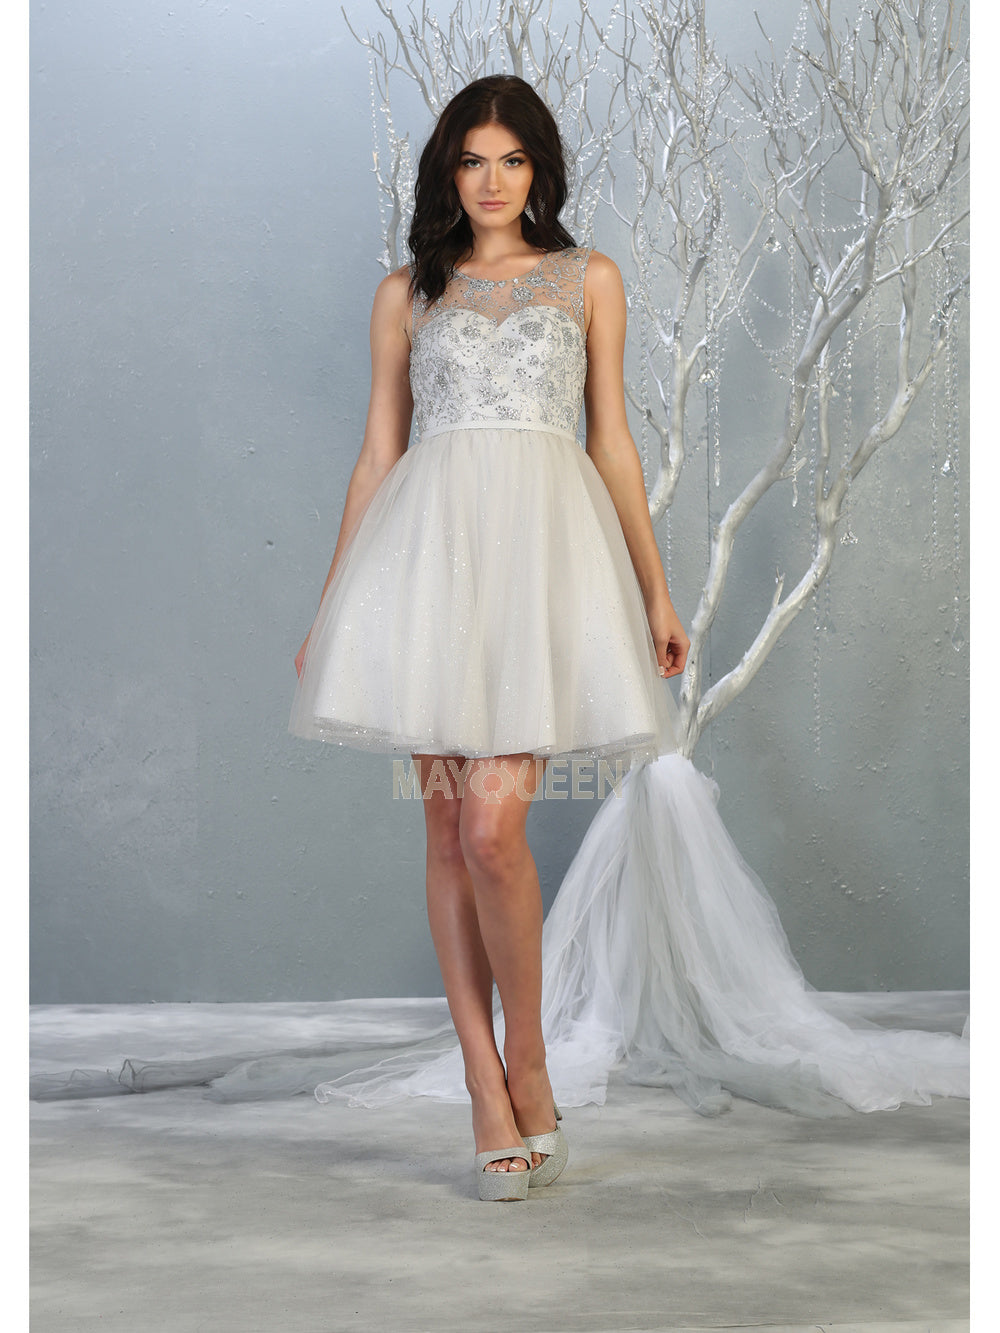 MQ 1803 - Shimmer Tulle A-Line Homecoming Dress with Glitter Print Bodice Homecoming Mayqueen 2 Silver 